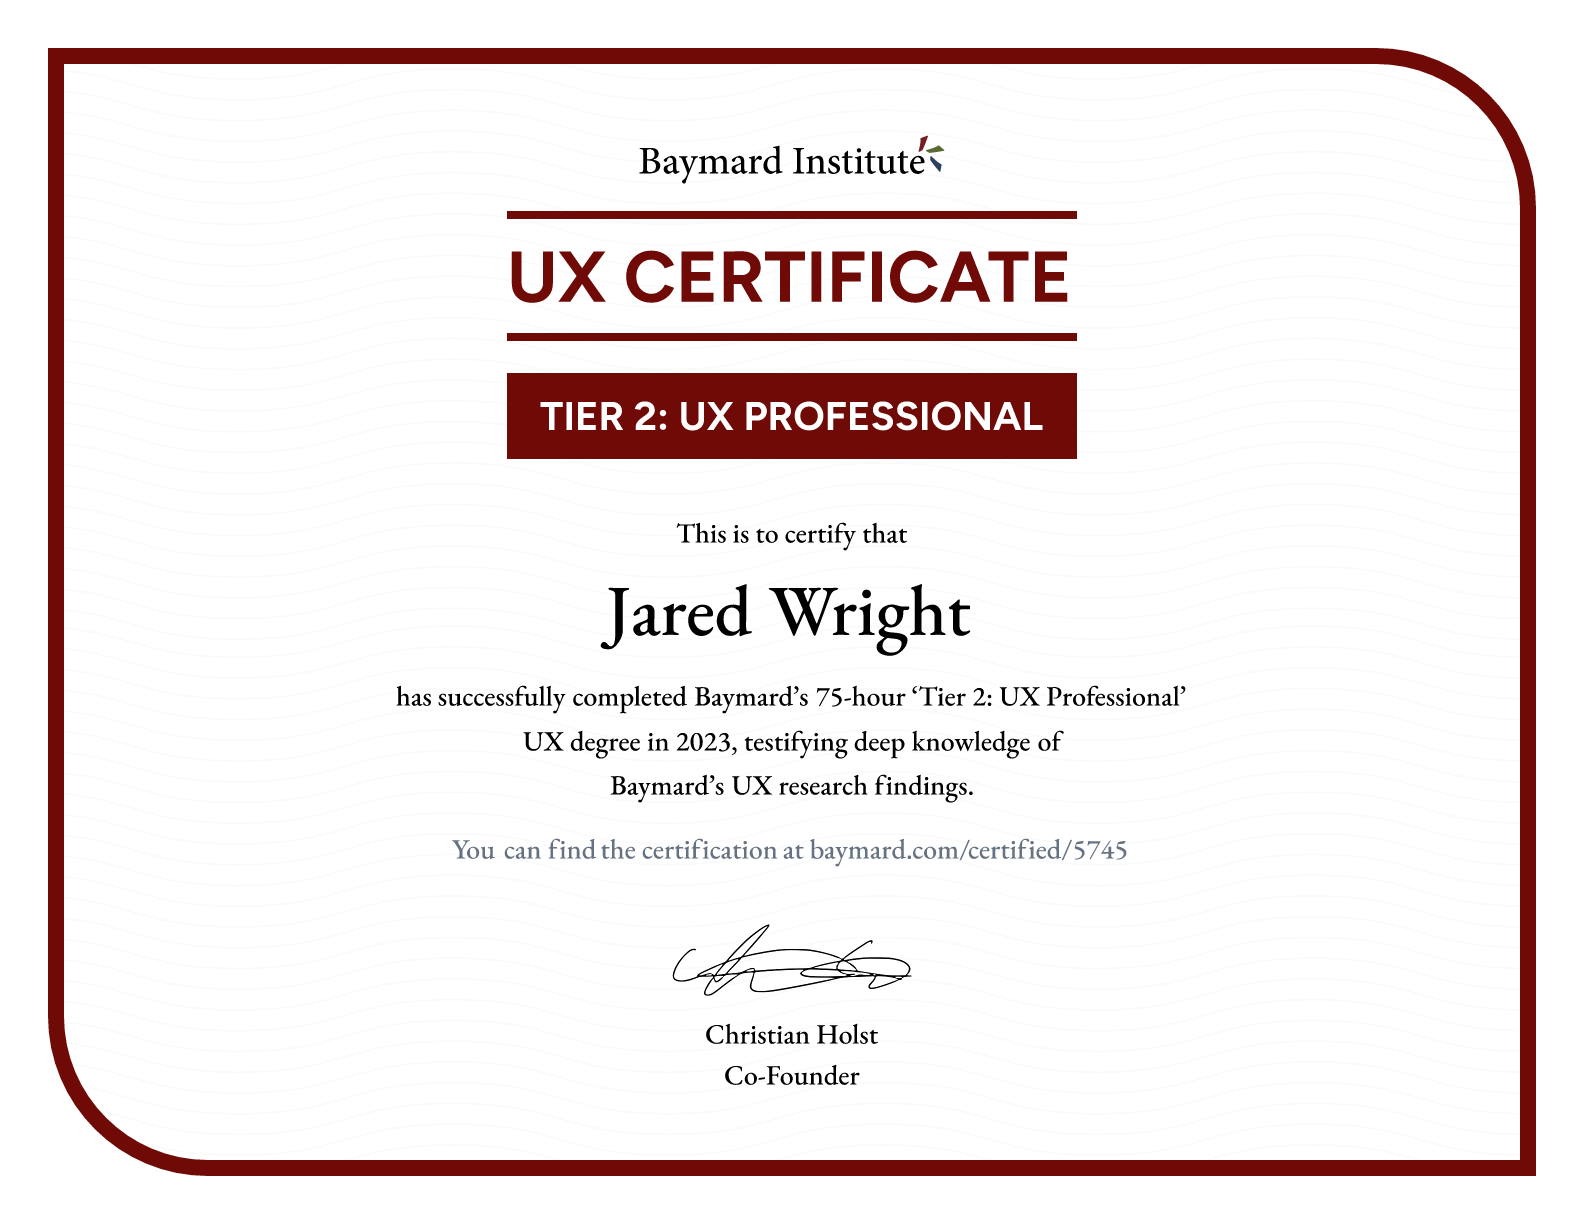 Jared Wright’s certificate